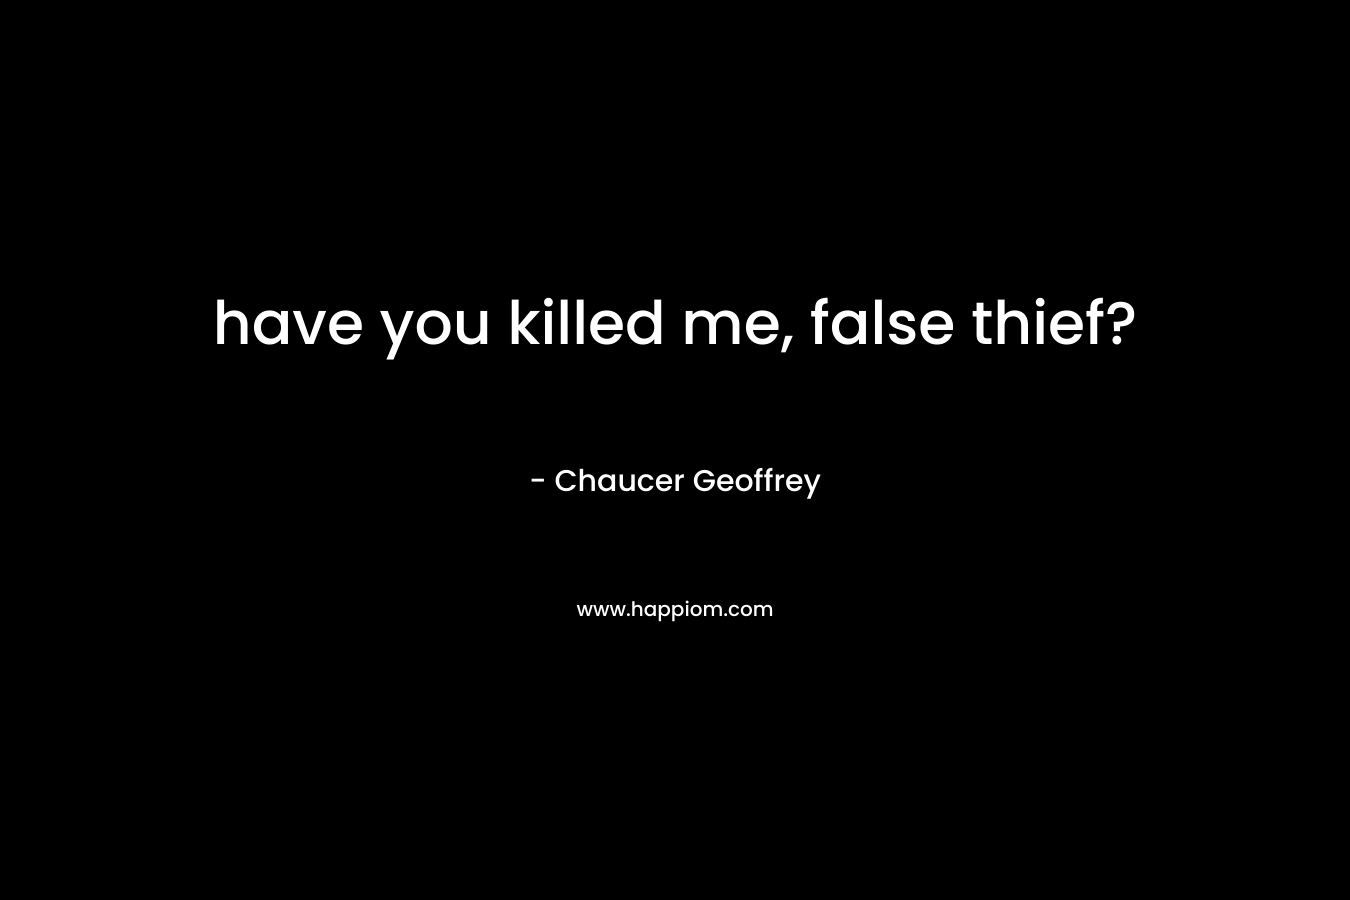 have you killed me, false thief? – Chaucer Geoffrey